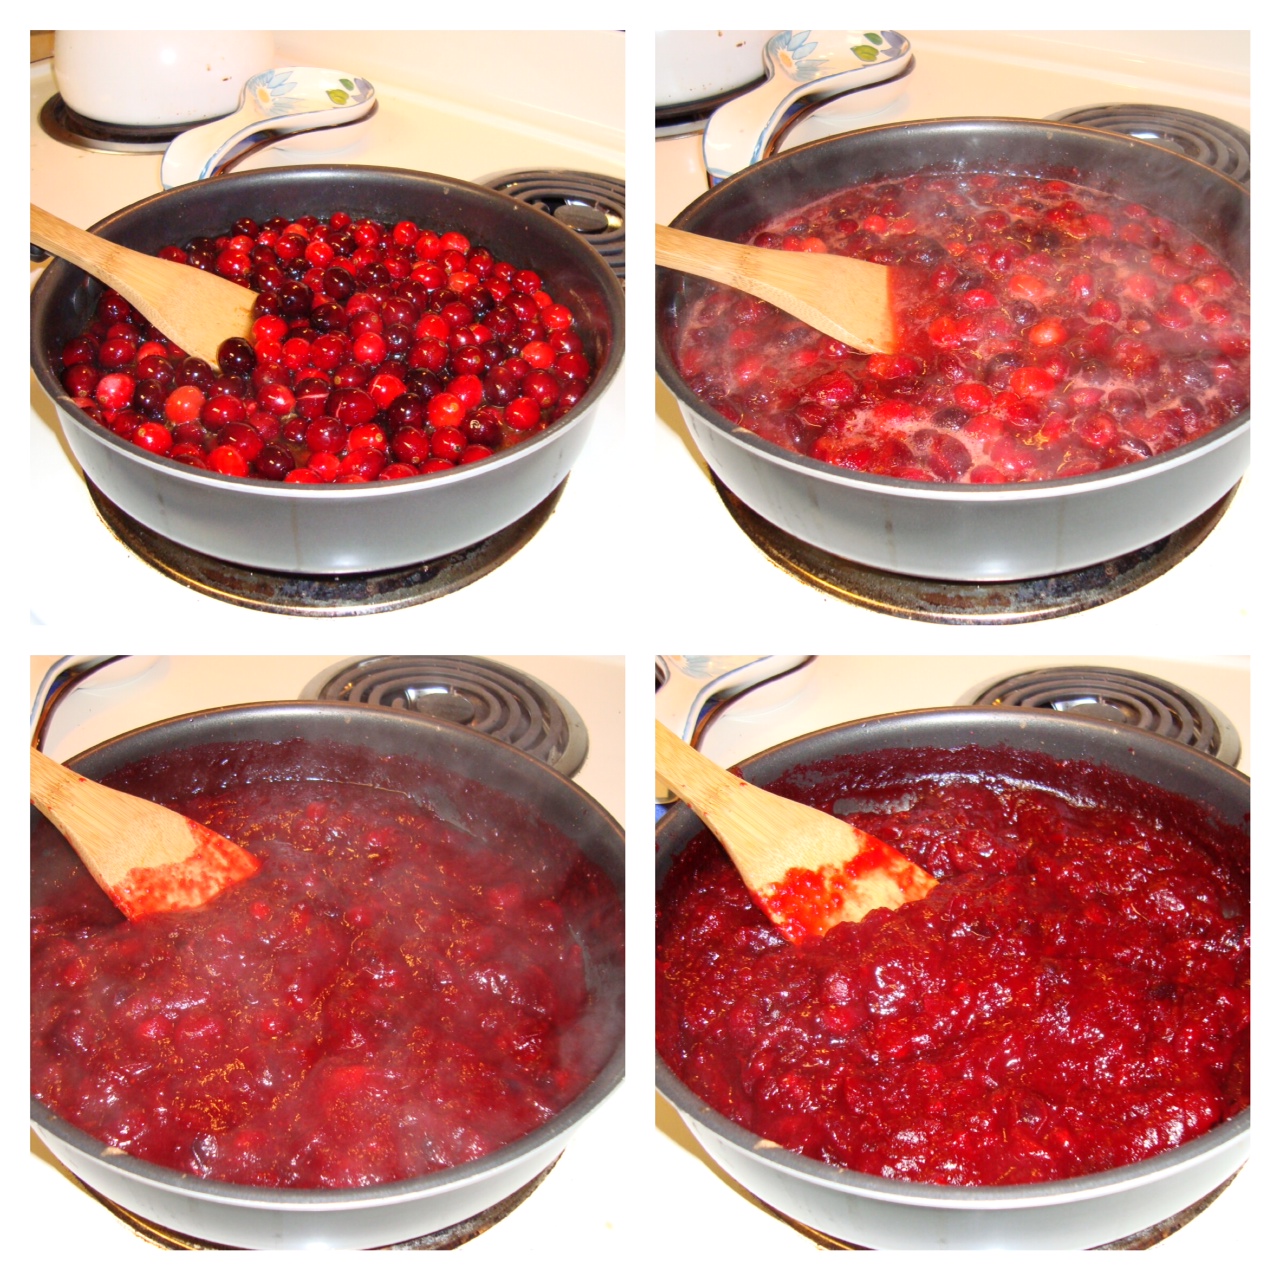 Steps from Whole Cranberries to Sauce